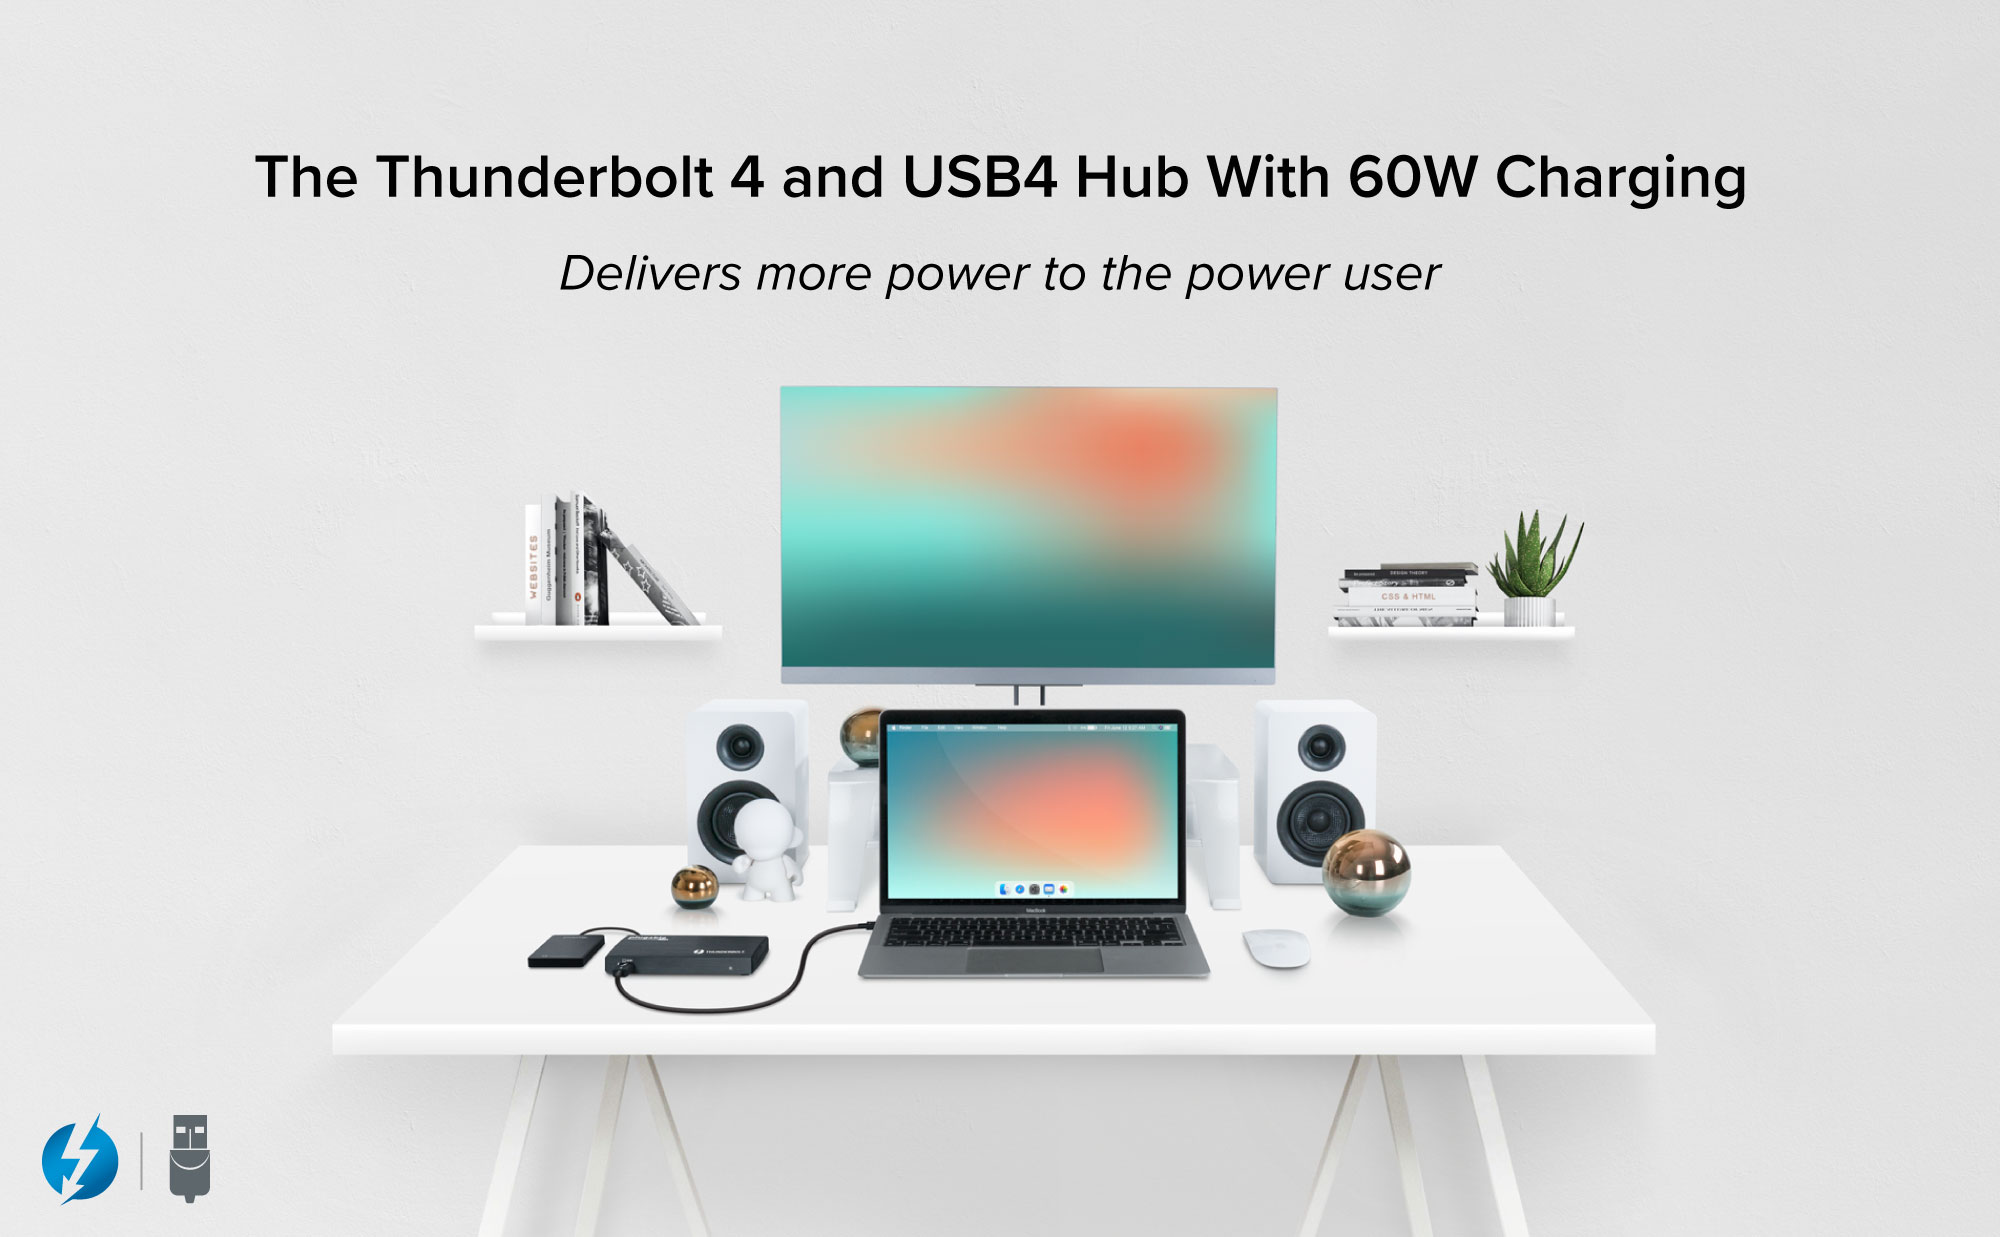 The Thunderbolt 4 and USB4 Hub with 60W Charging